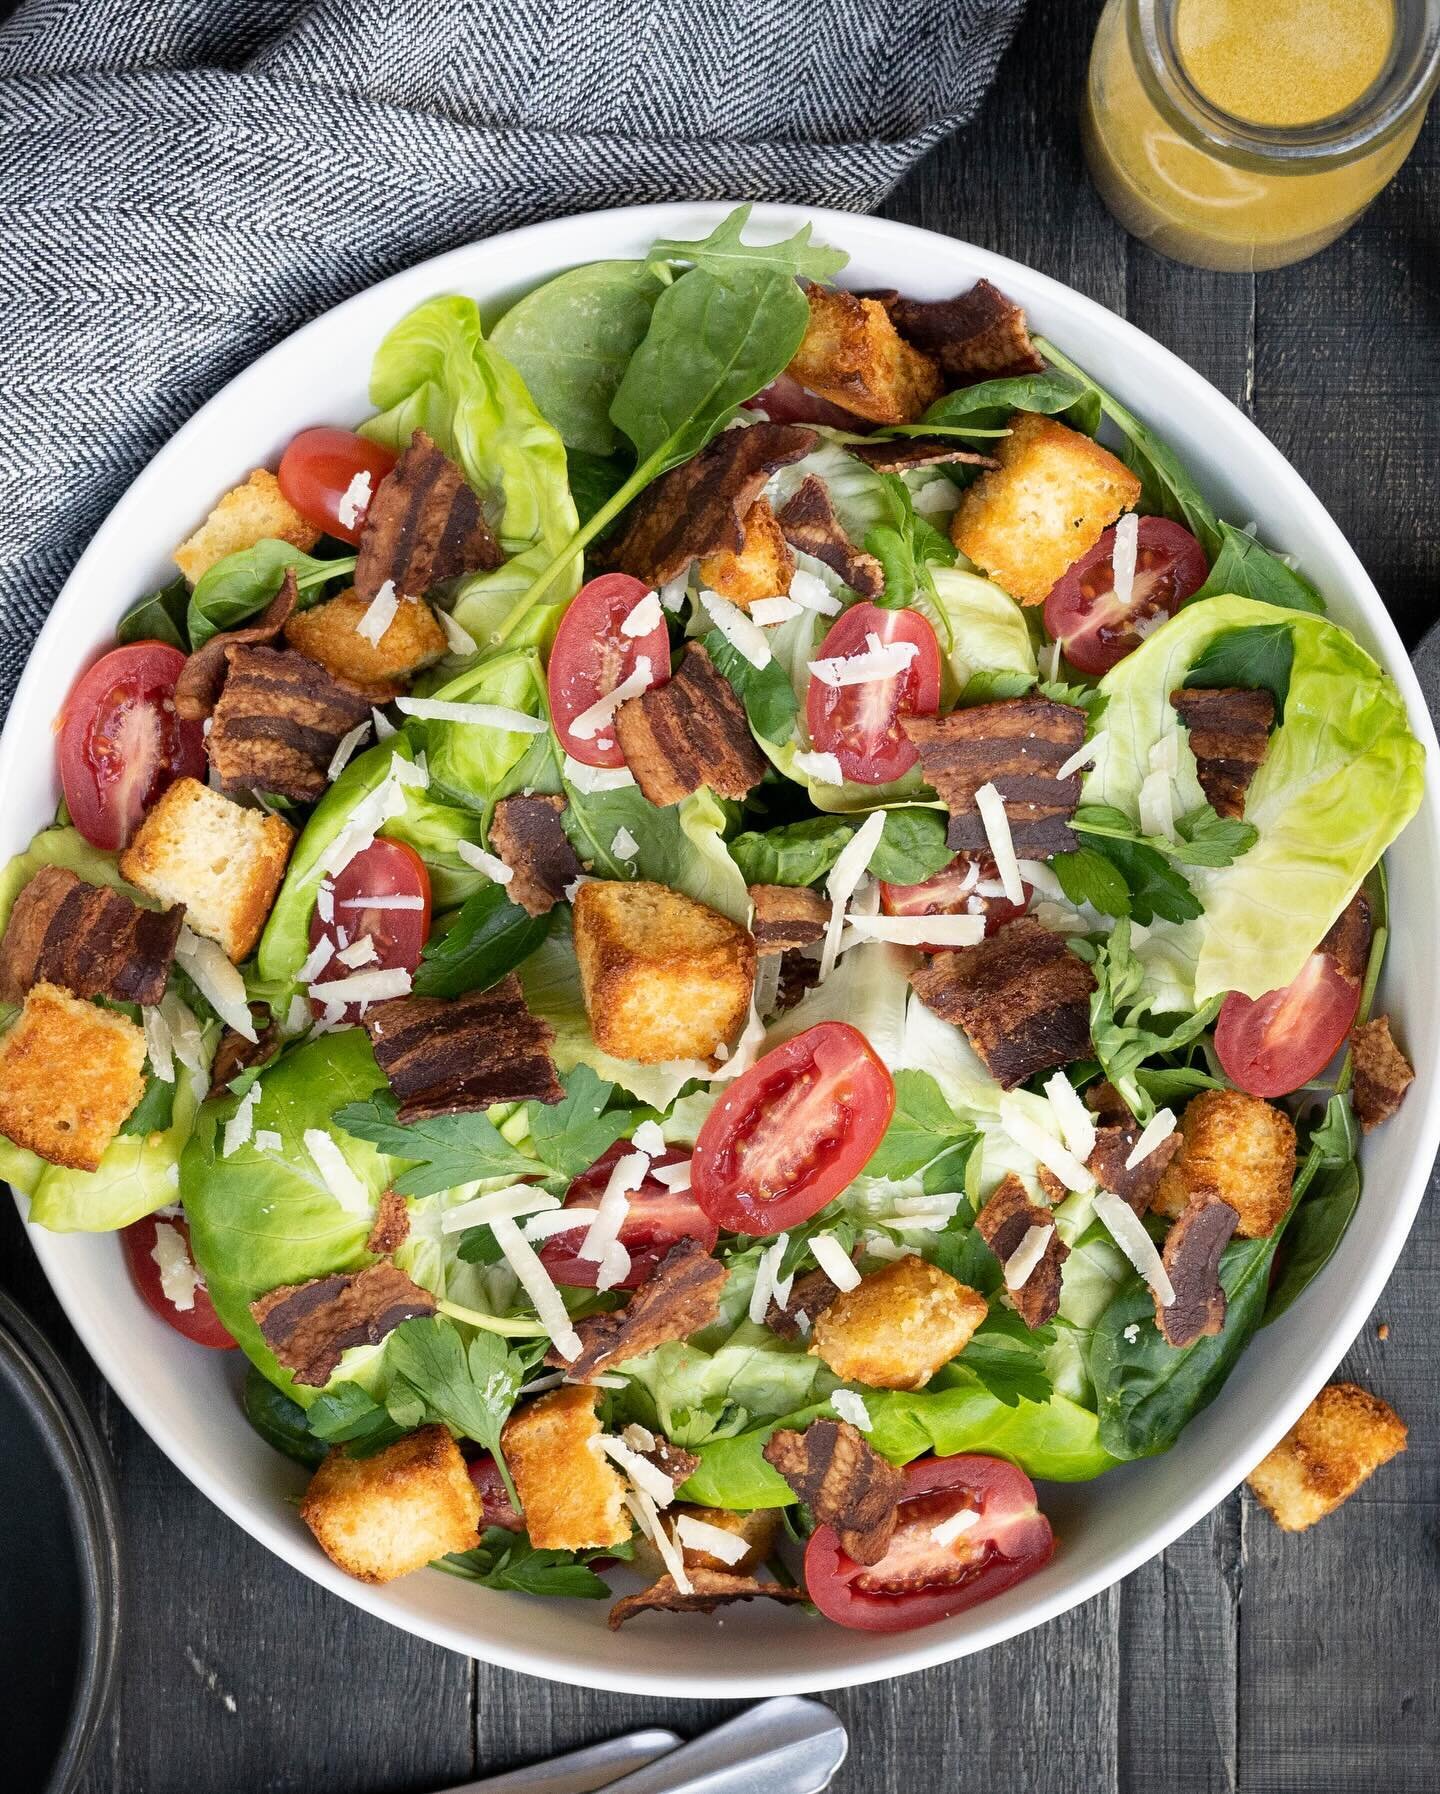 A BLT in a salad! A base of tender lettuce and hearty winter greens,  salty punchiness from bacon and parmesan, sweet, bright tomatoes and golden, buttery, garlicky croutons to round it all out.
*
*
*
*
*
*
*
#BLT  #bacon #salad #croutons #kitchn #fo